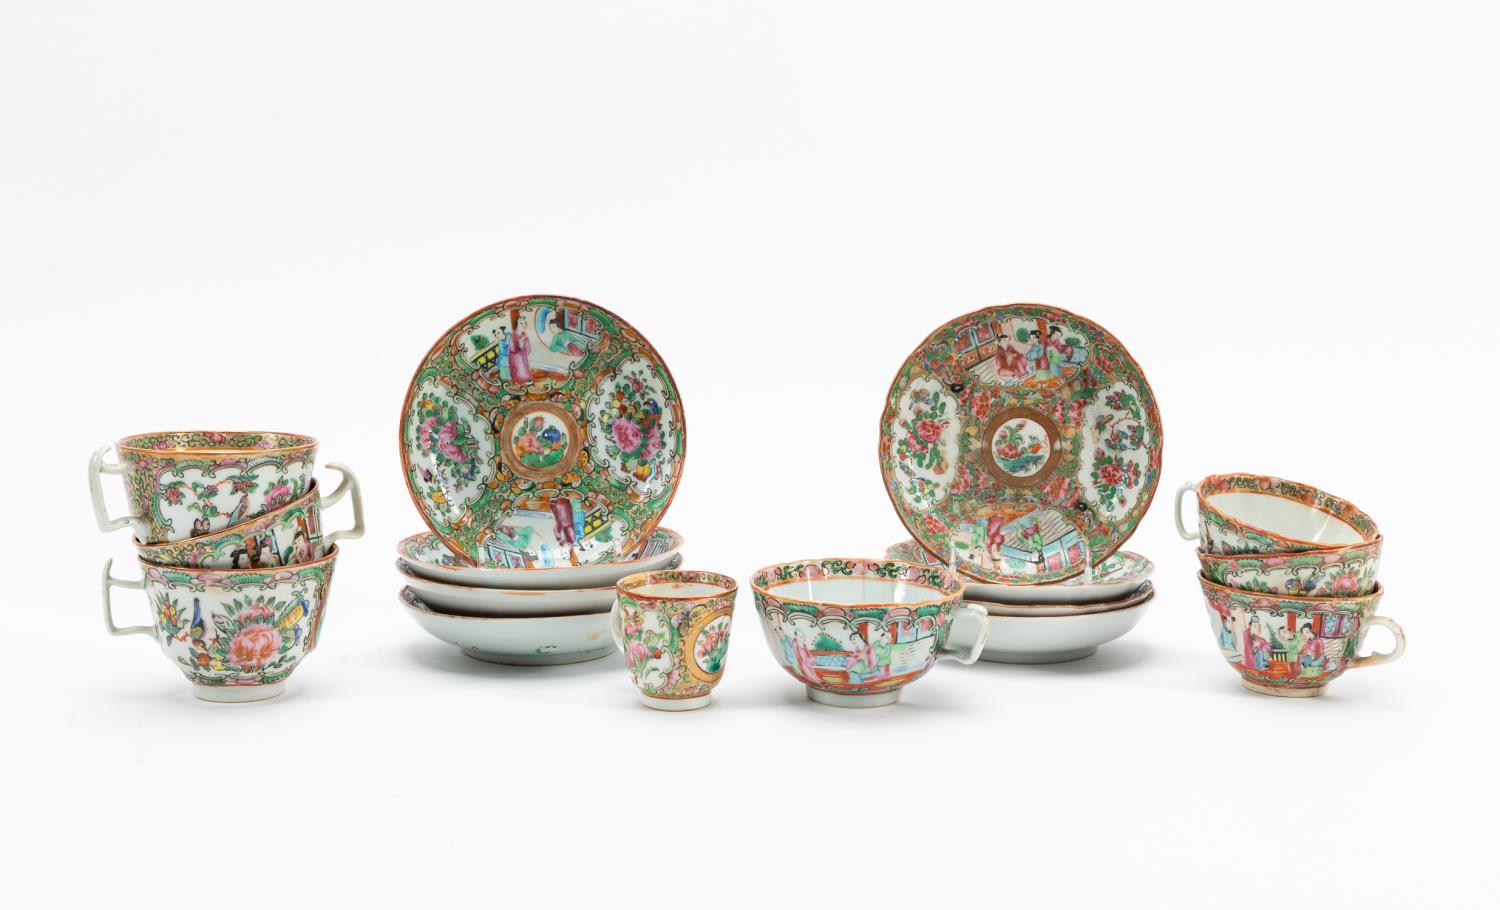 ROSE MEDALLION, SELECTION OF CUPS